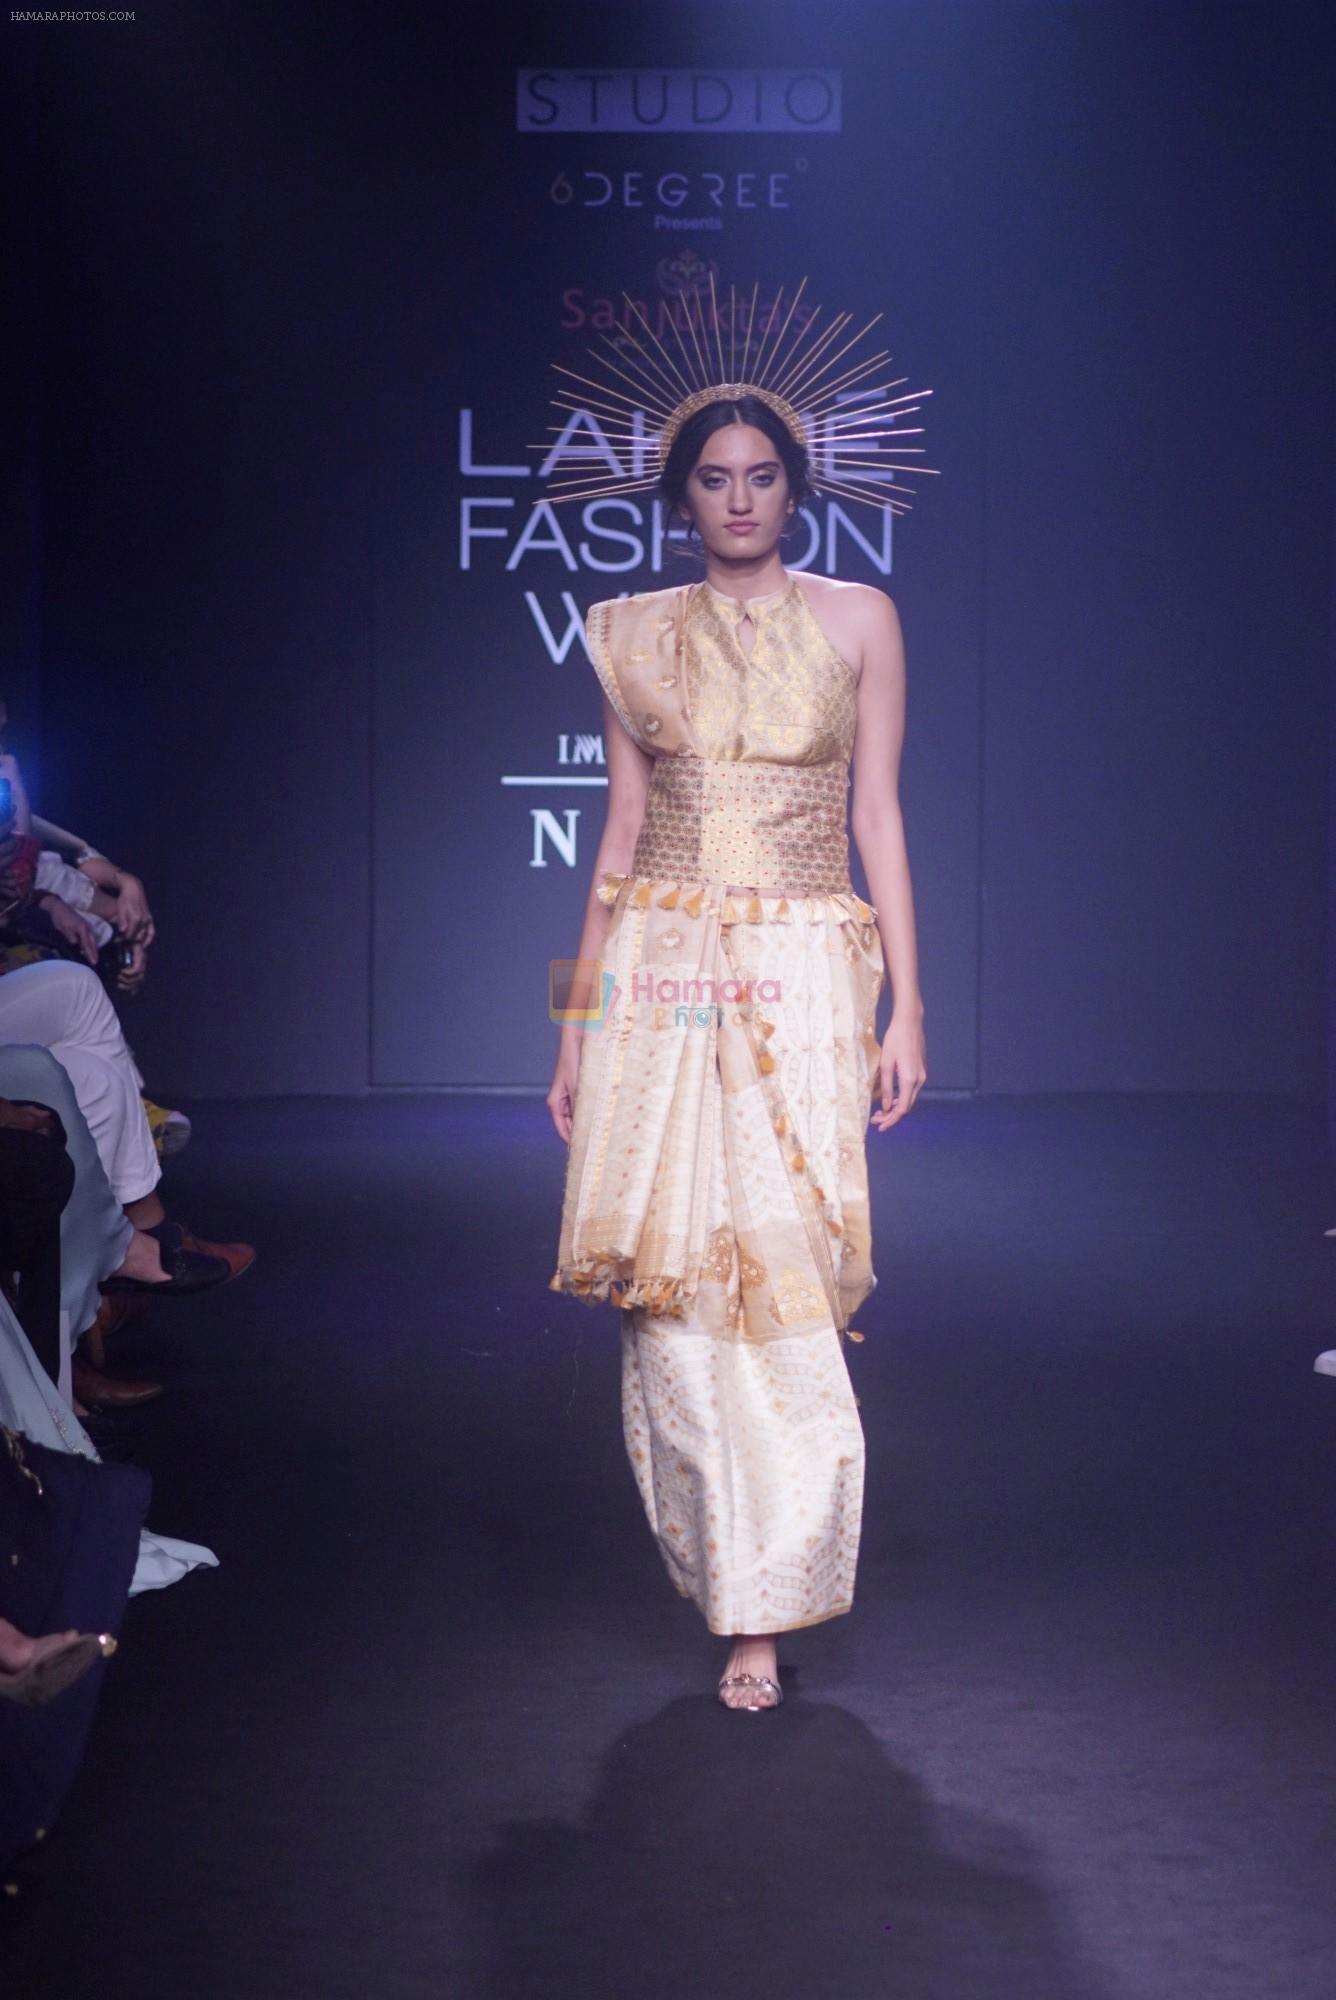 Model walk the ramp for 6 degree studio Show at lakme fashion week on 27th Aug 2018